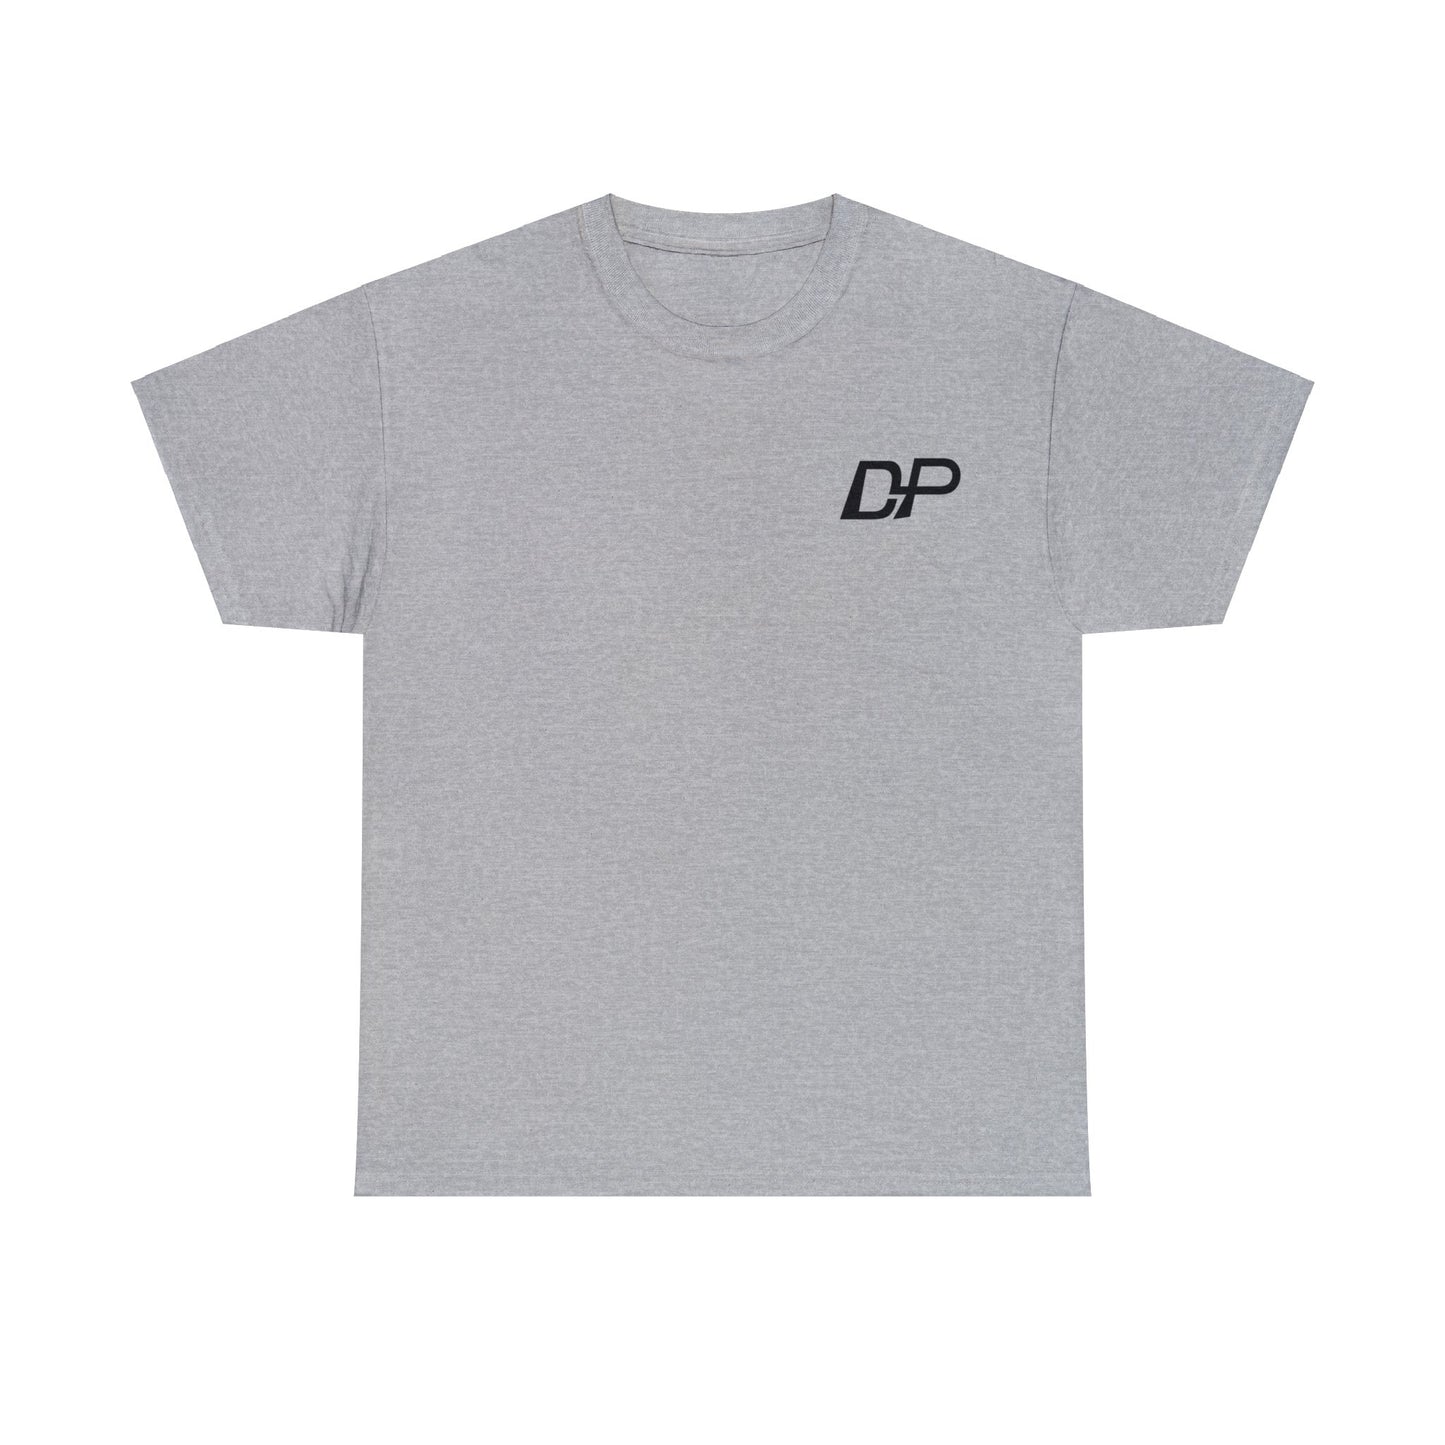 DeMarco Powell "DP" Double Sided Tee